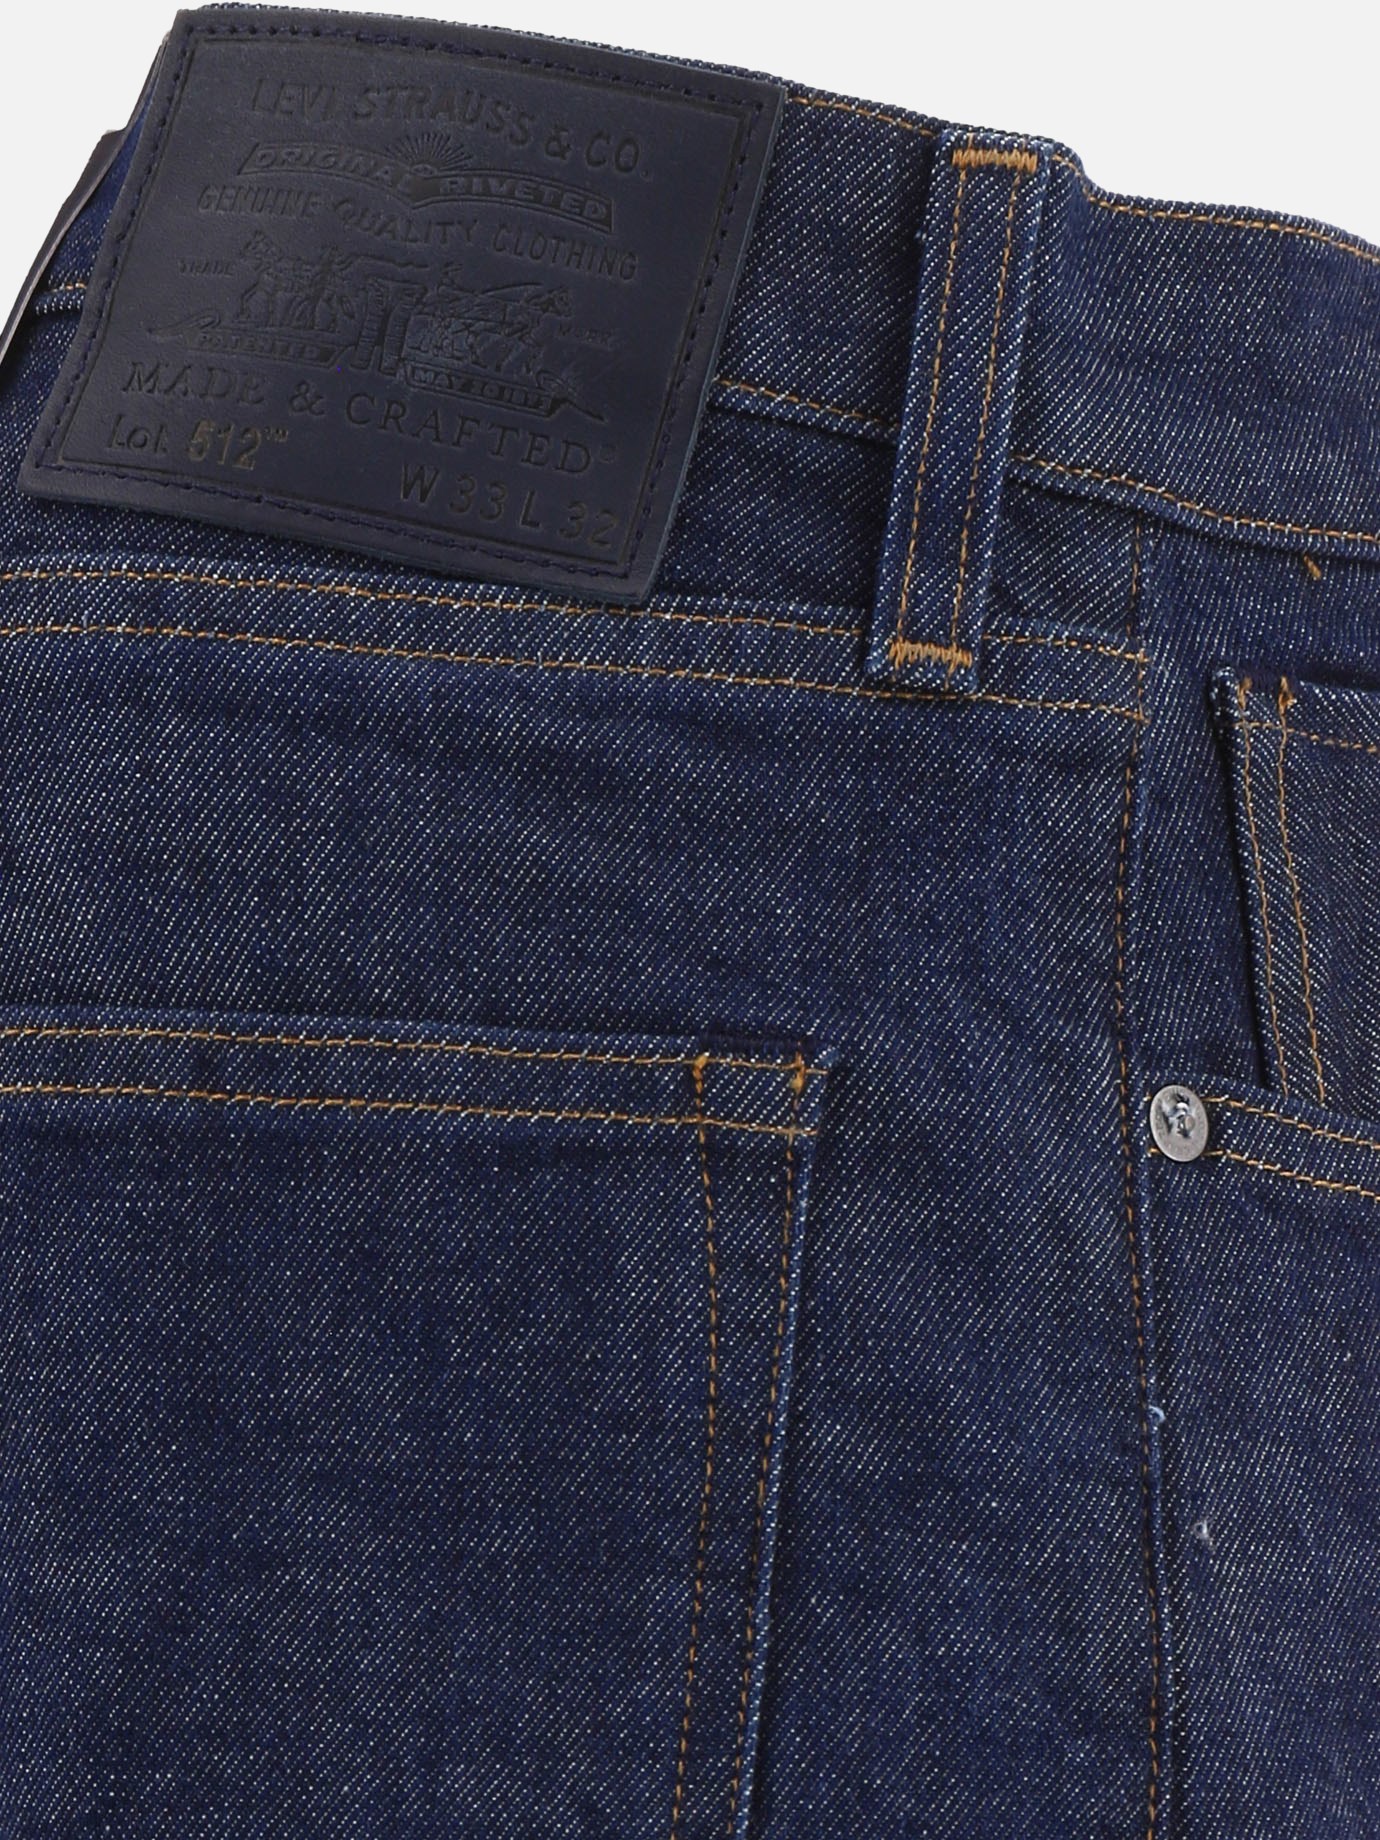 Jeans  512 Slim Taper  by Levi's Made & Crafted